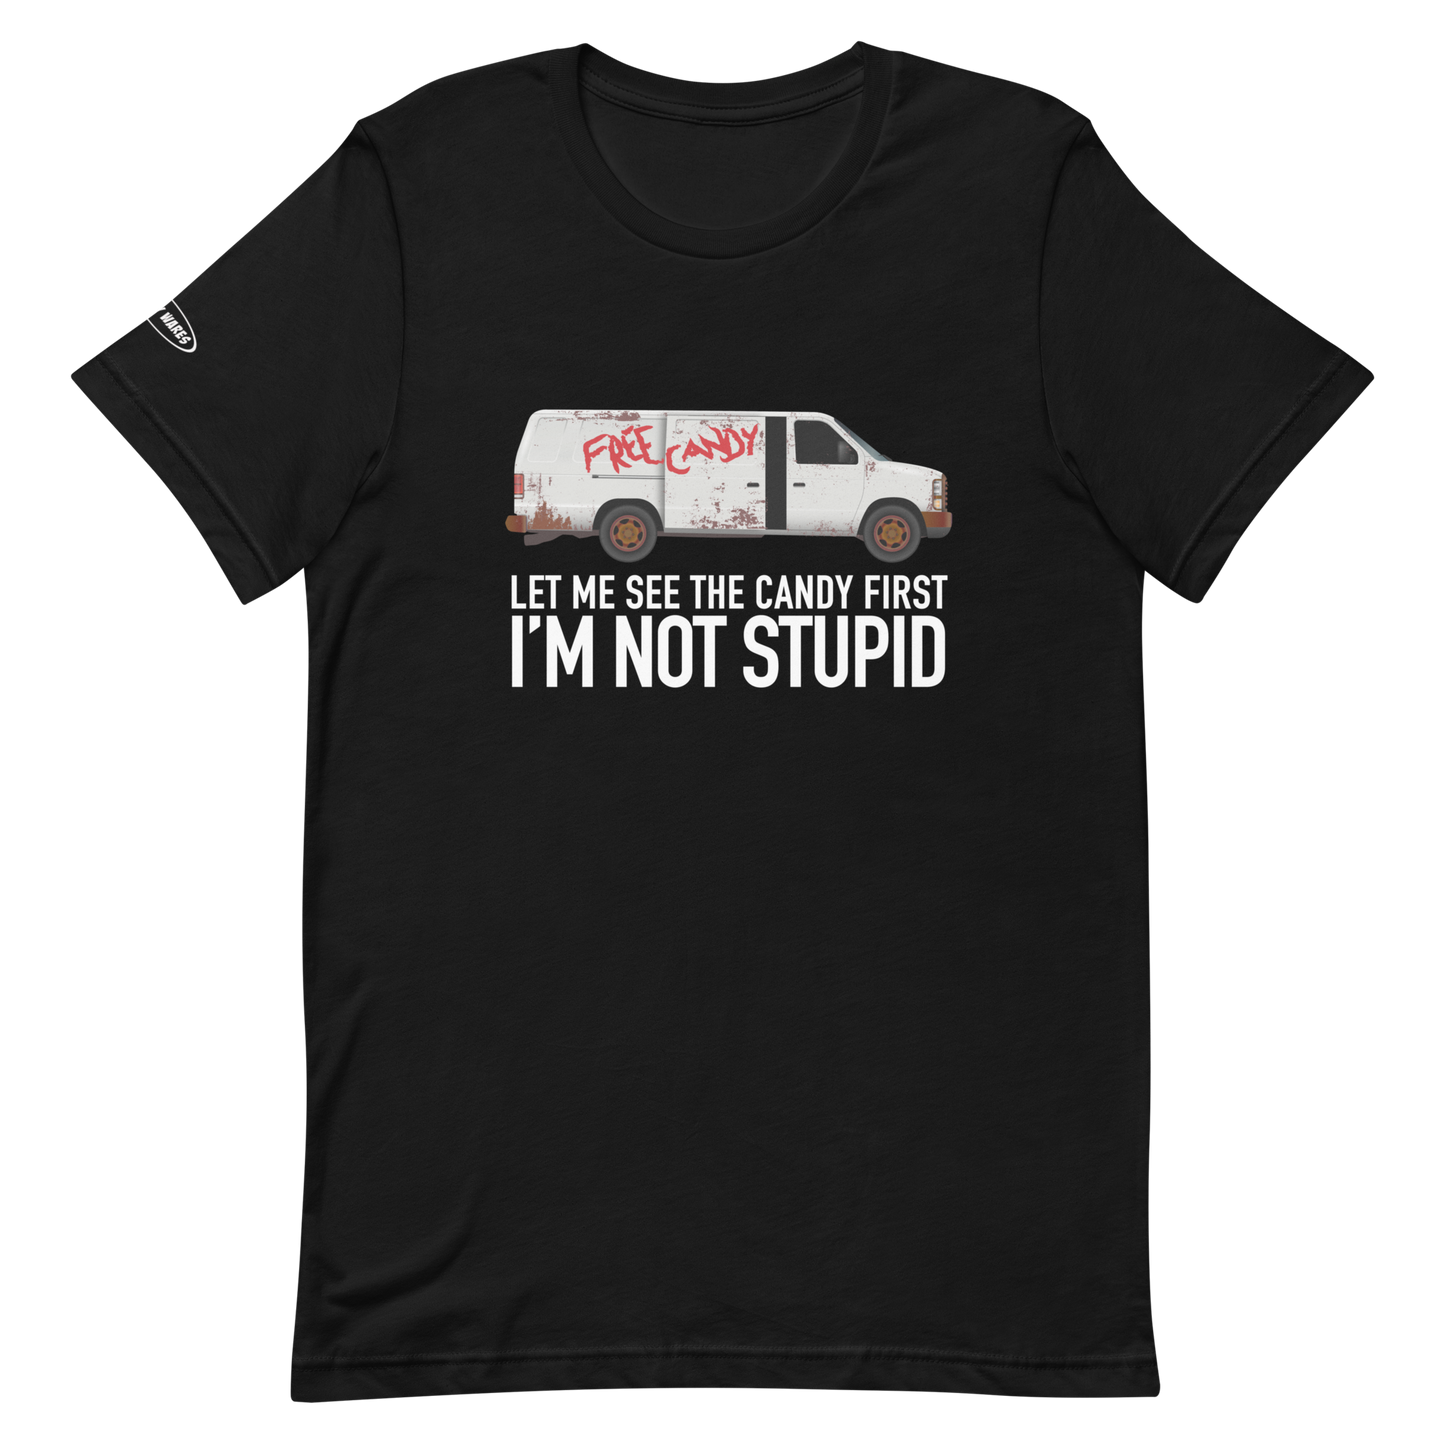 Let me See the Candy First, I'm Not Stupid - Funny T-Shirt